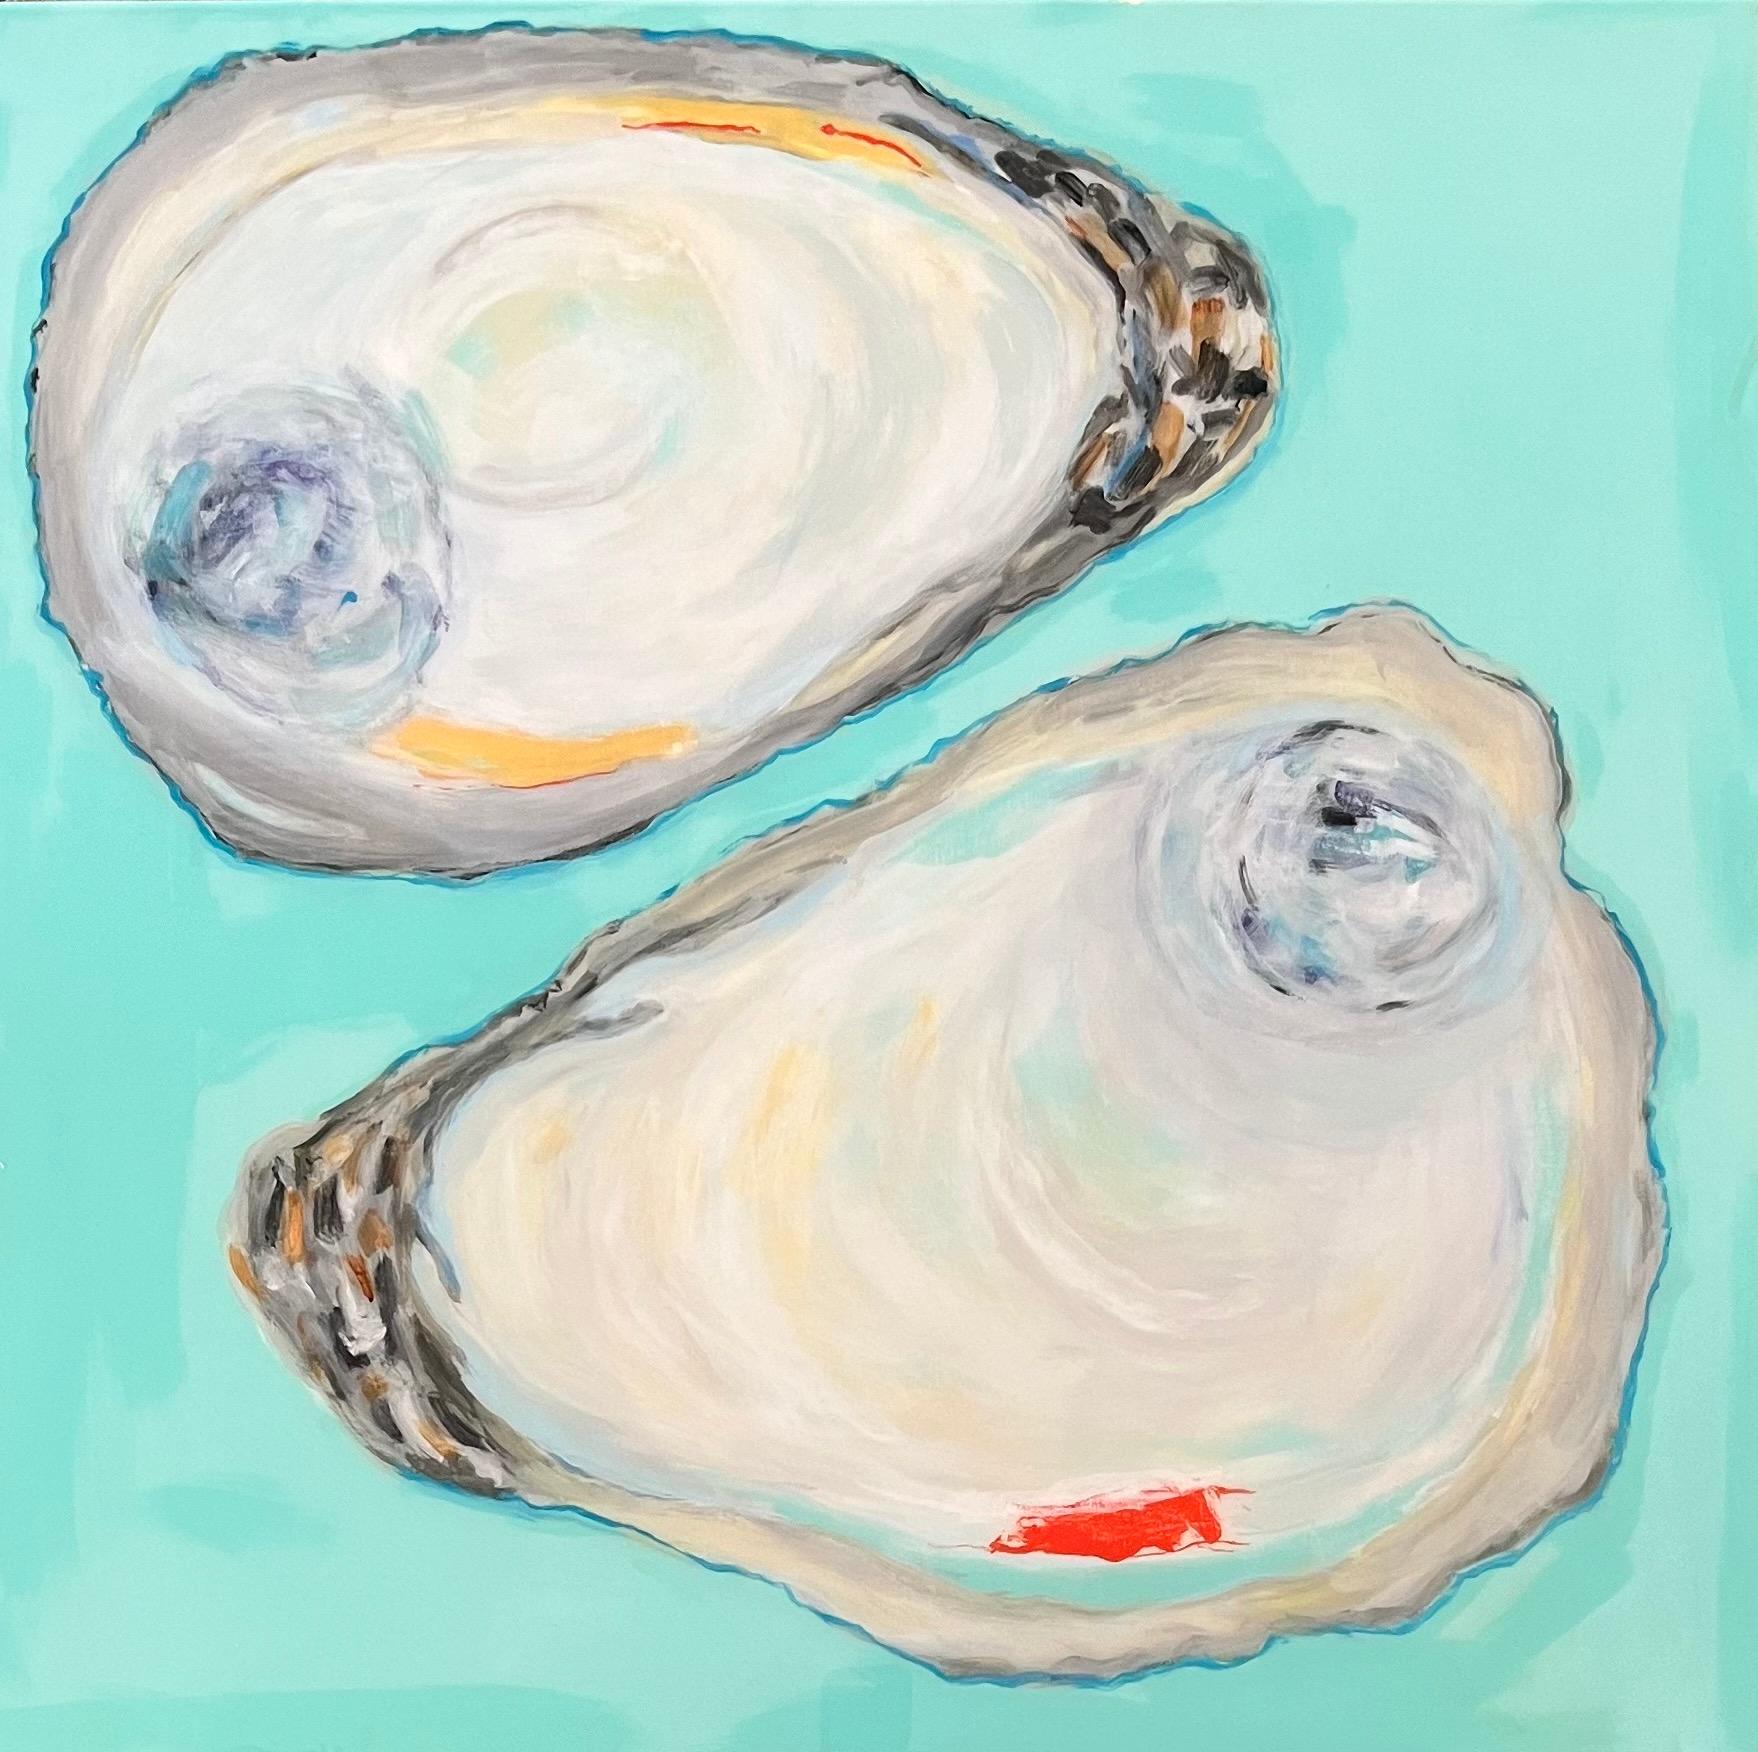 Anne Harney Figurative Painting - "Oysters in Green" 2 oysters against sea-foam green with a resin finish.